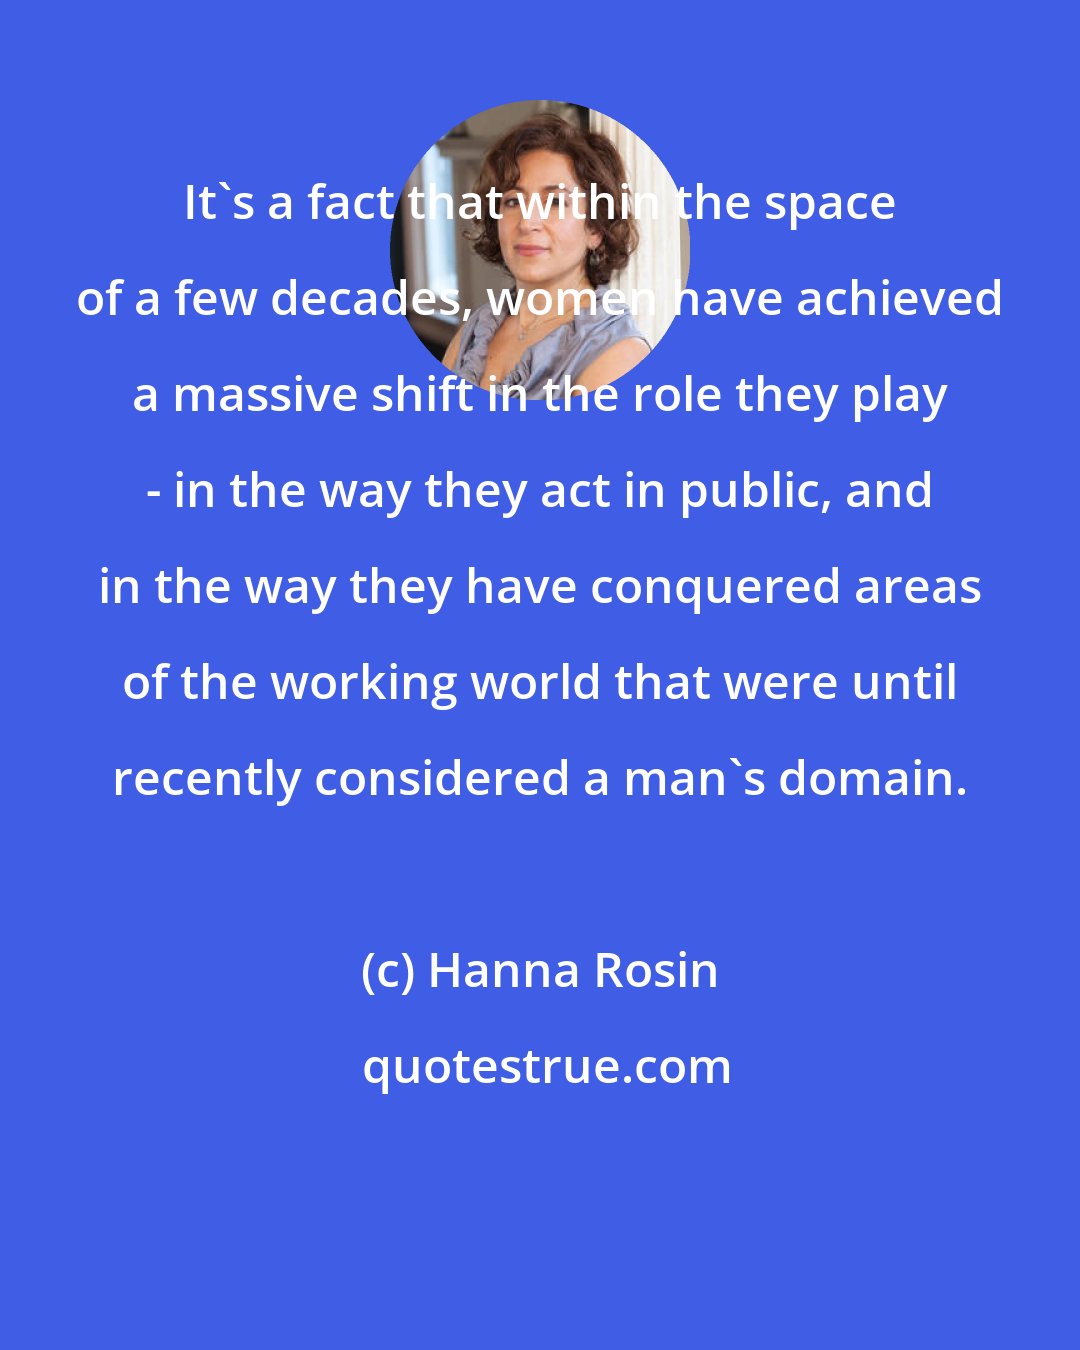 Hanna Rosin: It's a fact that within the space of a few decades, women have achieved a massive shift in the role they play - in the way they act in public, and in the way they have conquered areas of the working world that were until recently considered a man's domain.